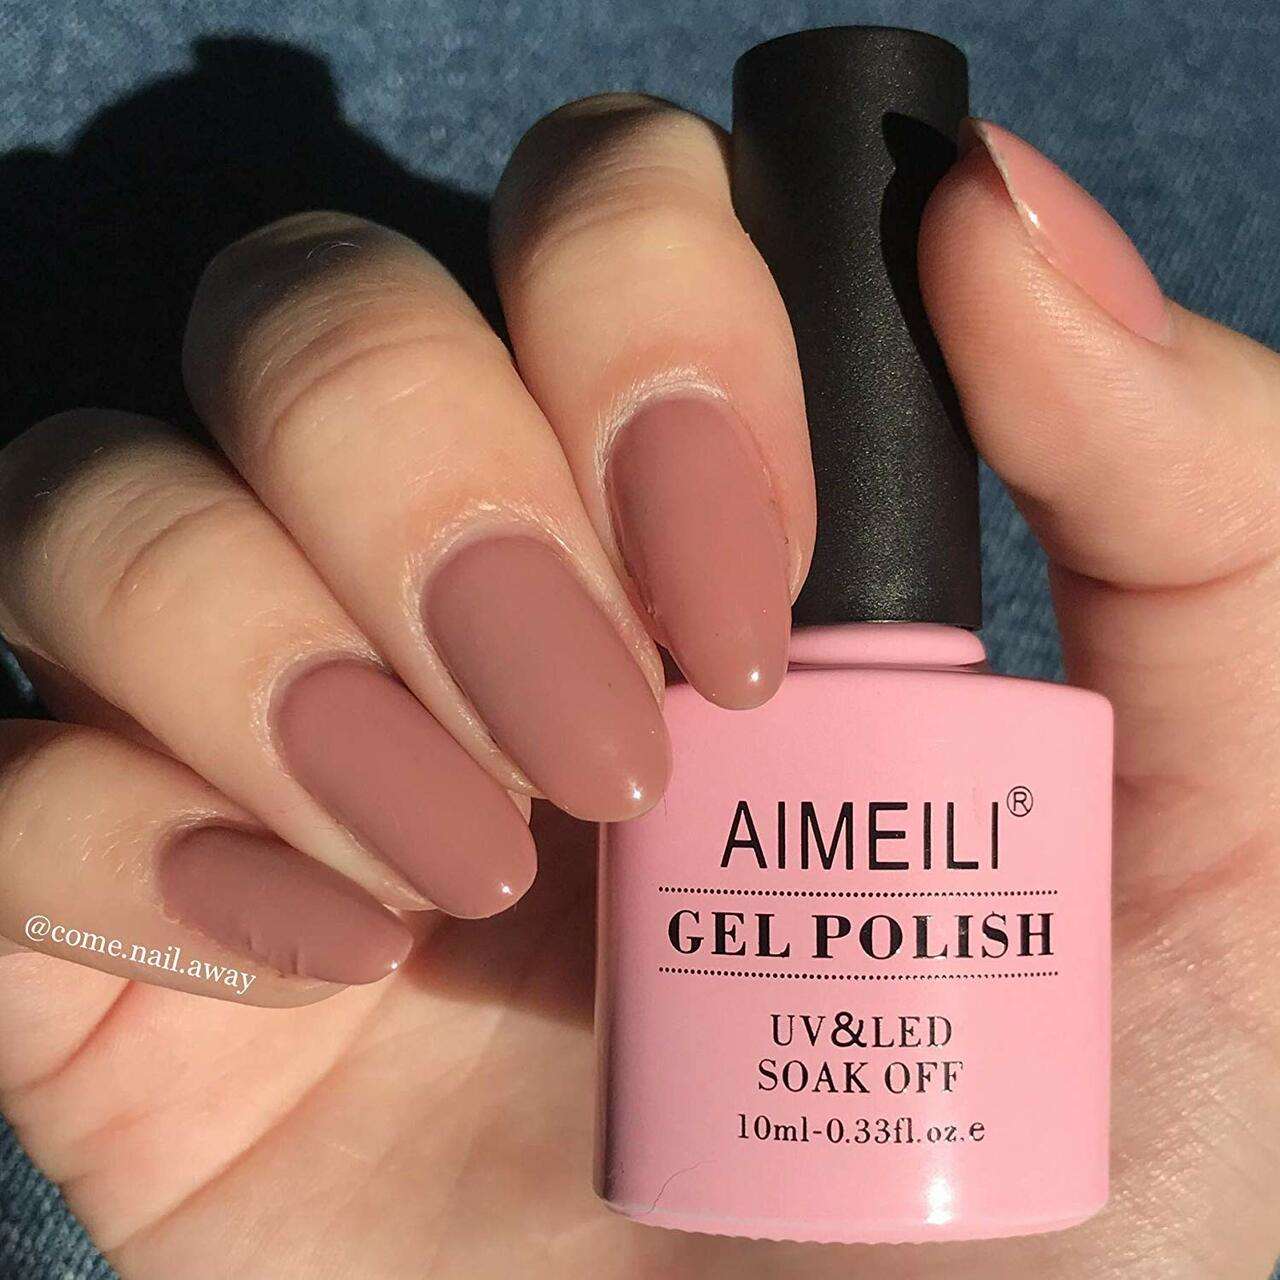 Nude Pink Acrylic Nails on Brown Skin #nailideas #brownnails  #brownnailsondarkskin #coffin #cof… | Pink acrylic nails, Cute nail colors, Acrylic  nails coffin short